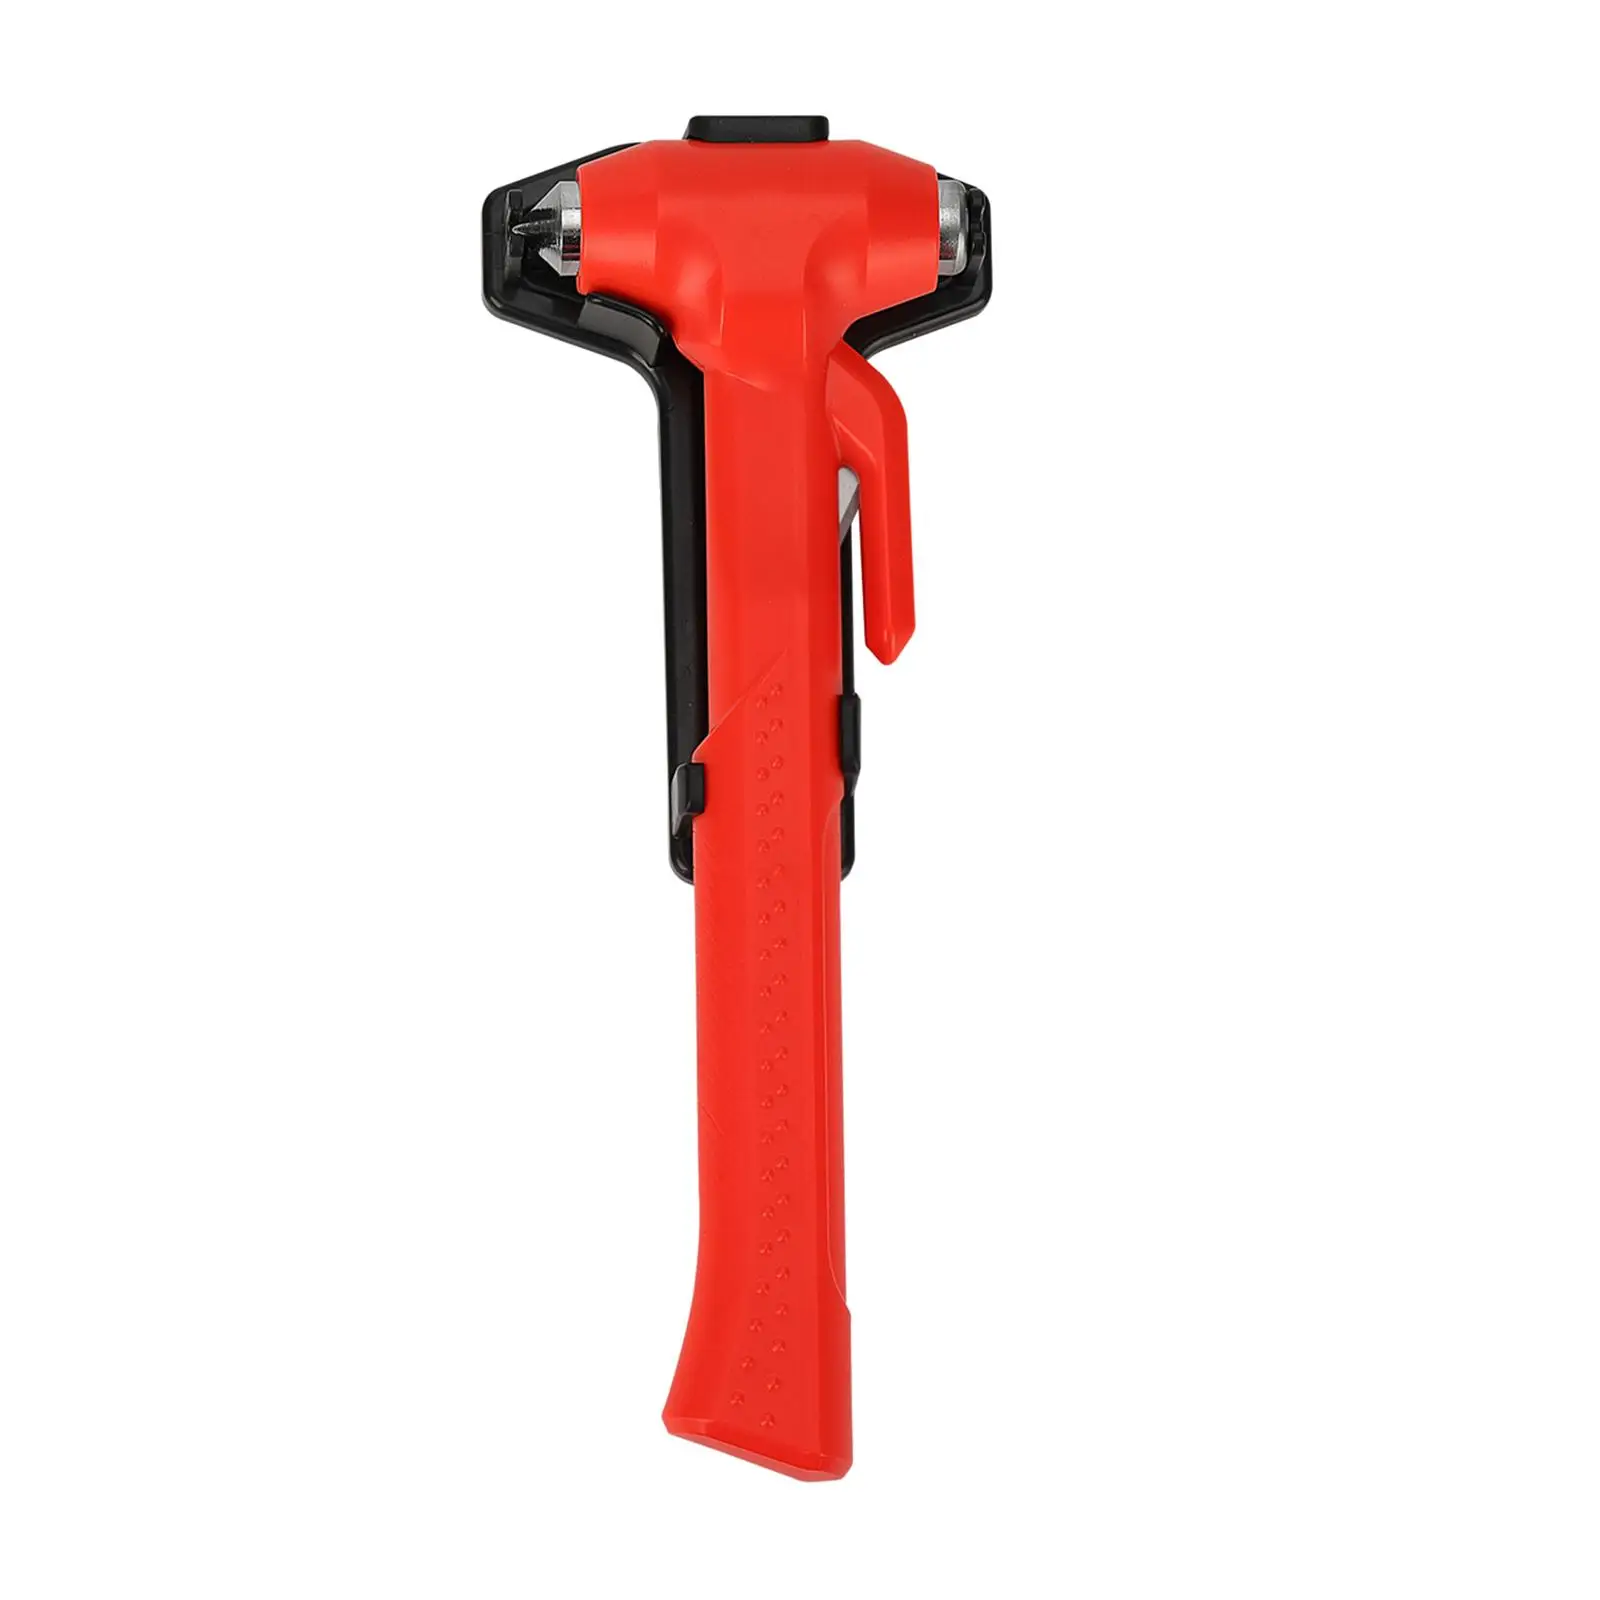 Automotive Safety Hammer Tool Non Slip Handle Window Breaker Emergency Rescue Tool for Card Vehicles Automotive Suvs Red